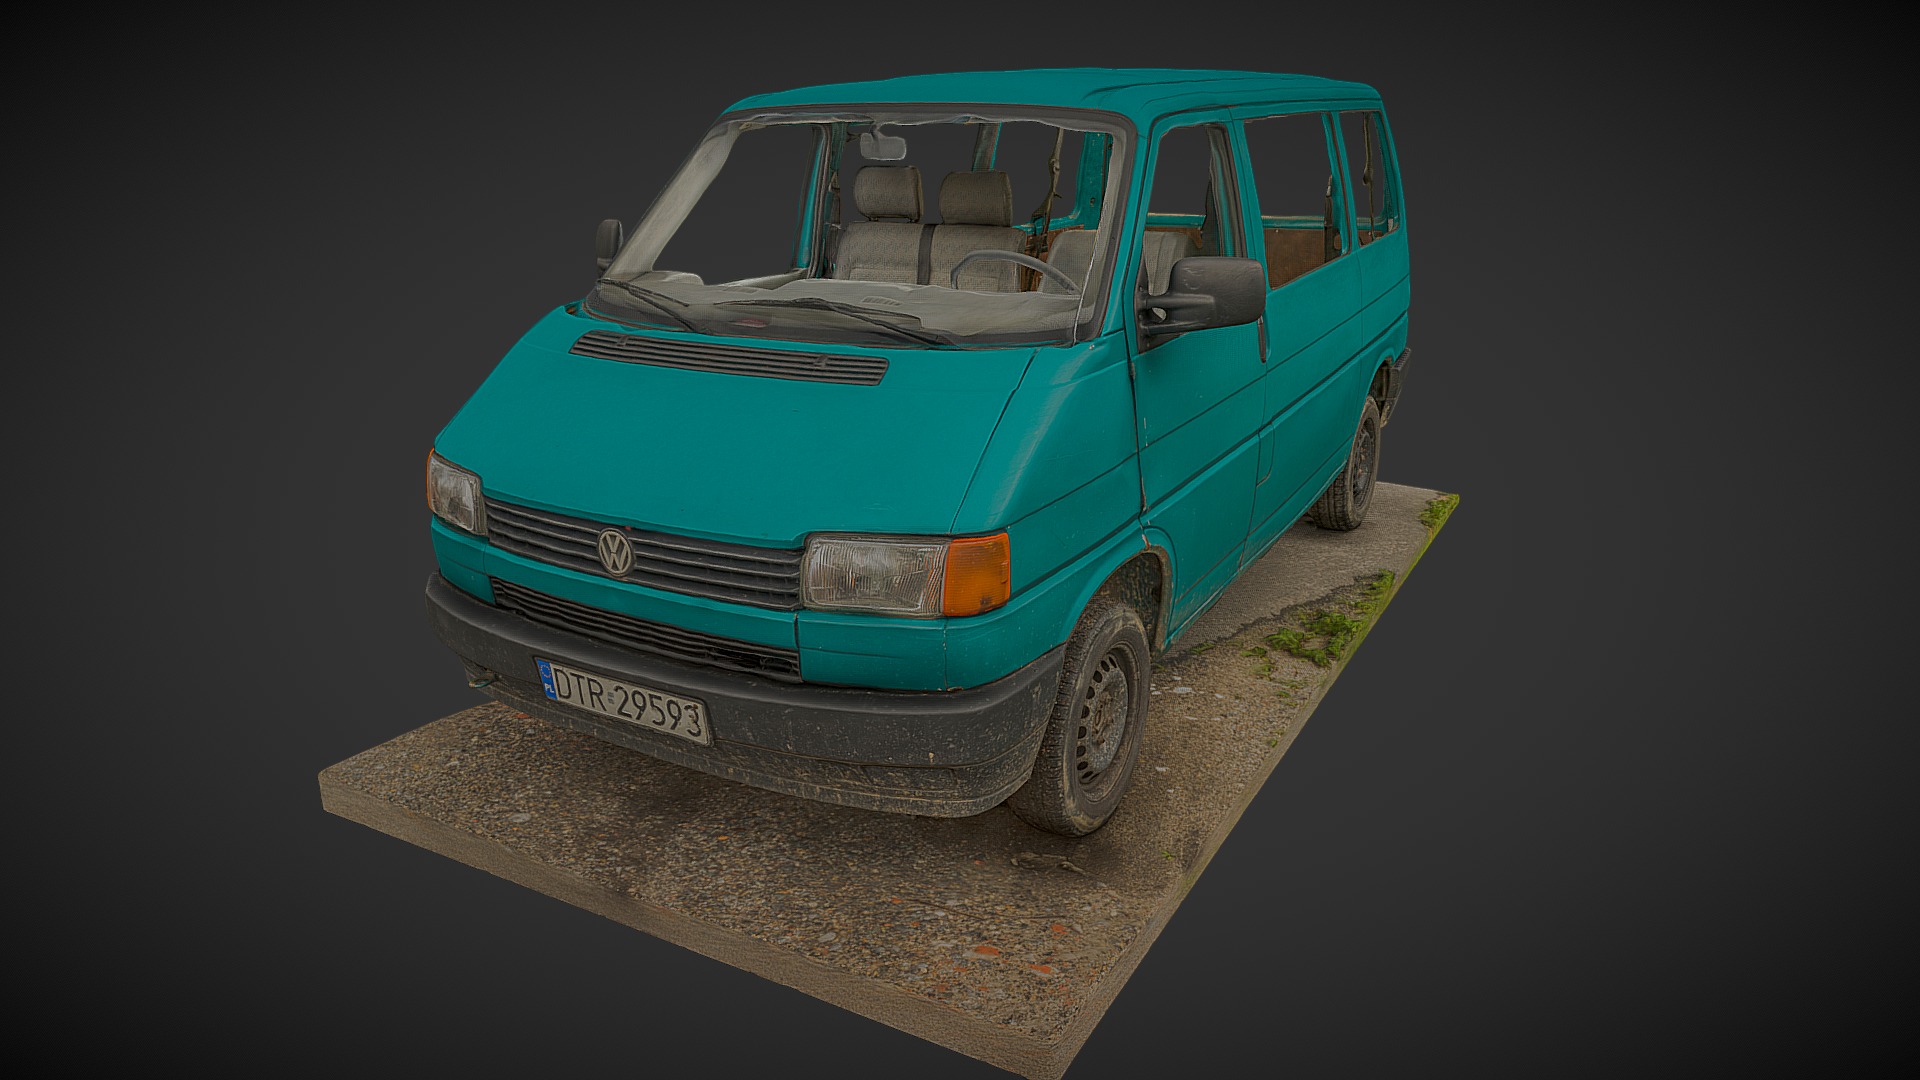 3D model Volkswagen Transporter - This is a 3D model of the Volkswagen Transporter. The 3D model is about a blue car parked on a concrete surface.